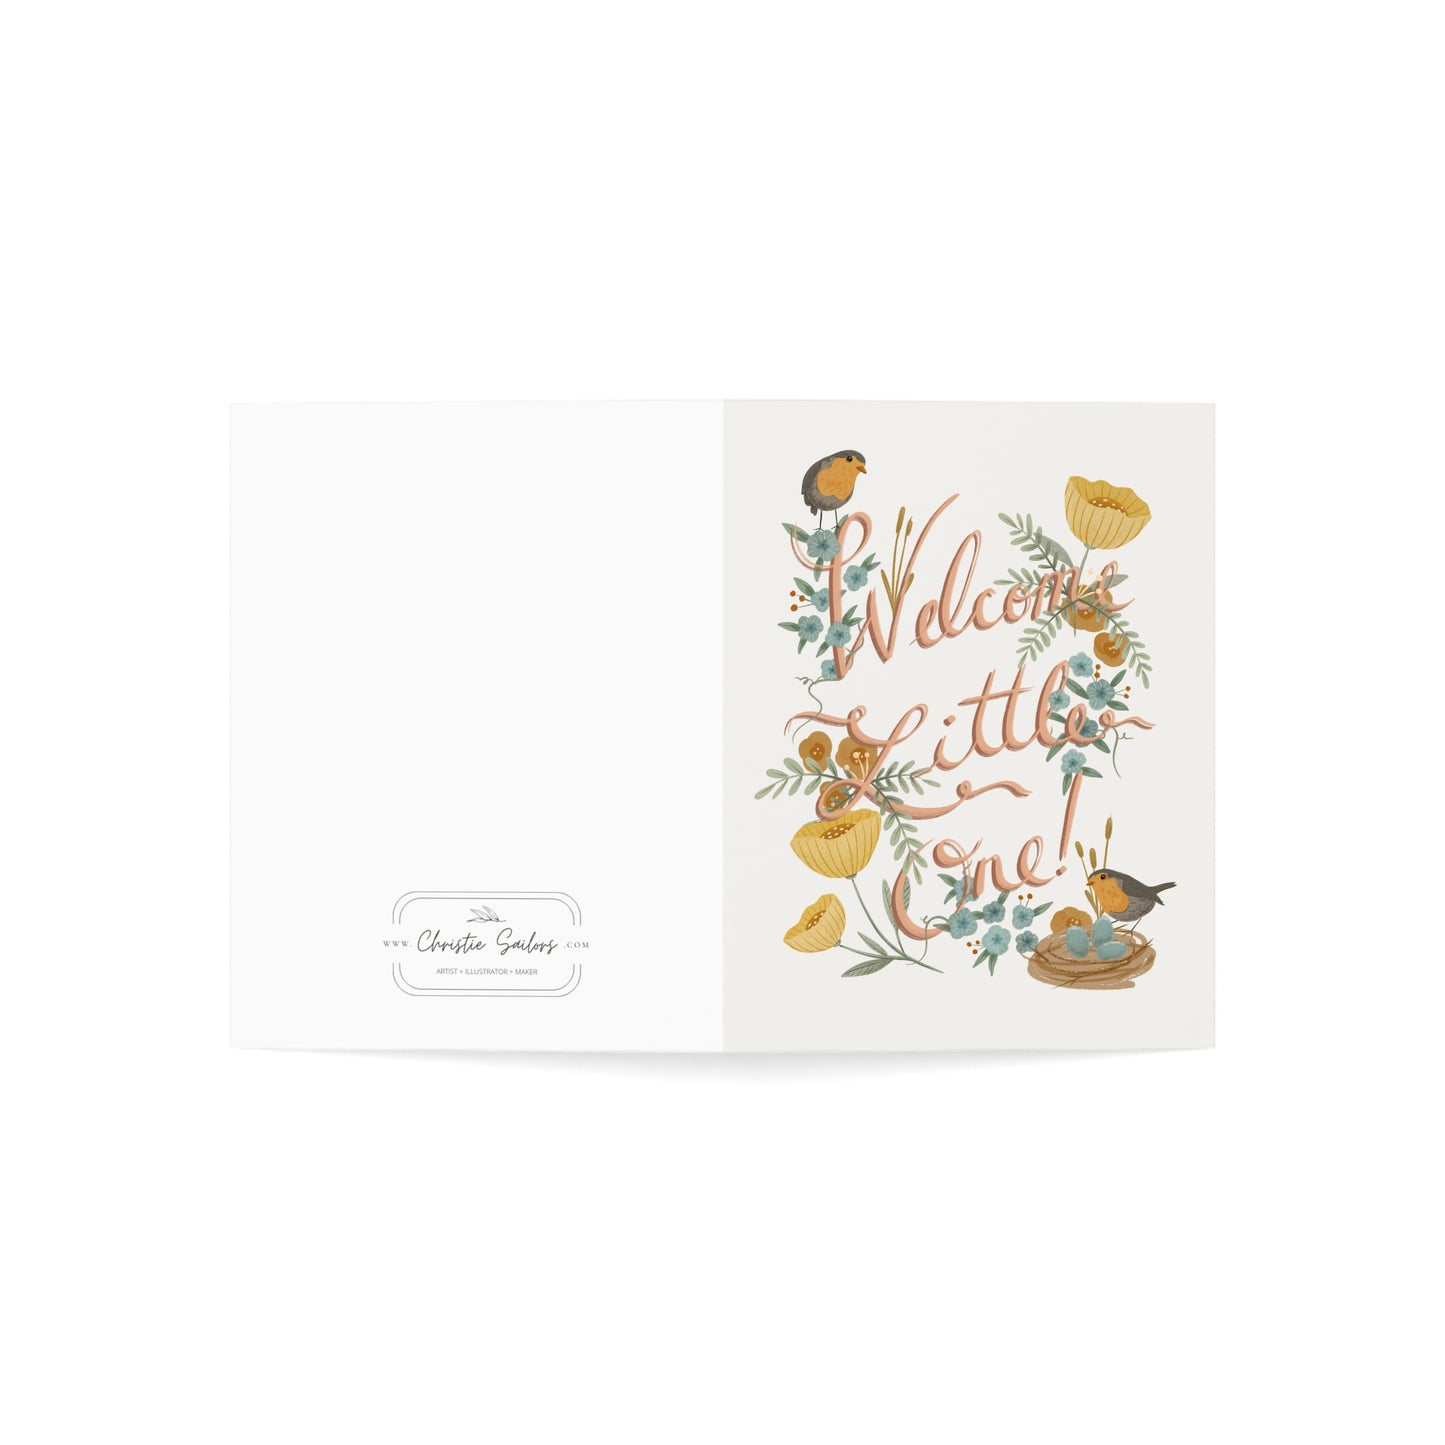 Welcome Little One (White) Greeting Cards (1, 10, 30, and 50pcs)